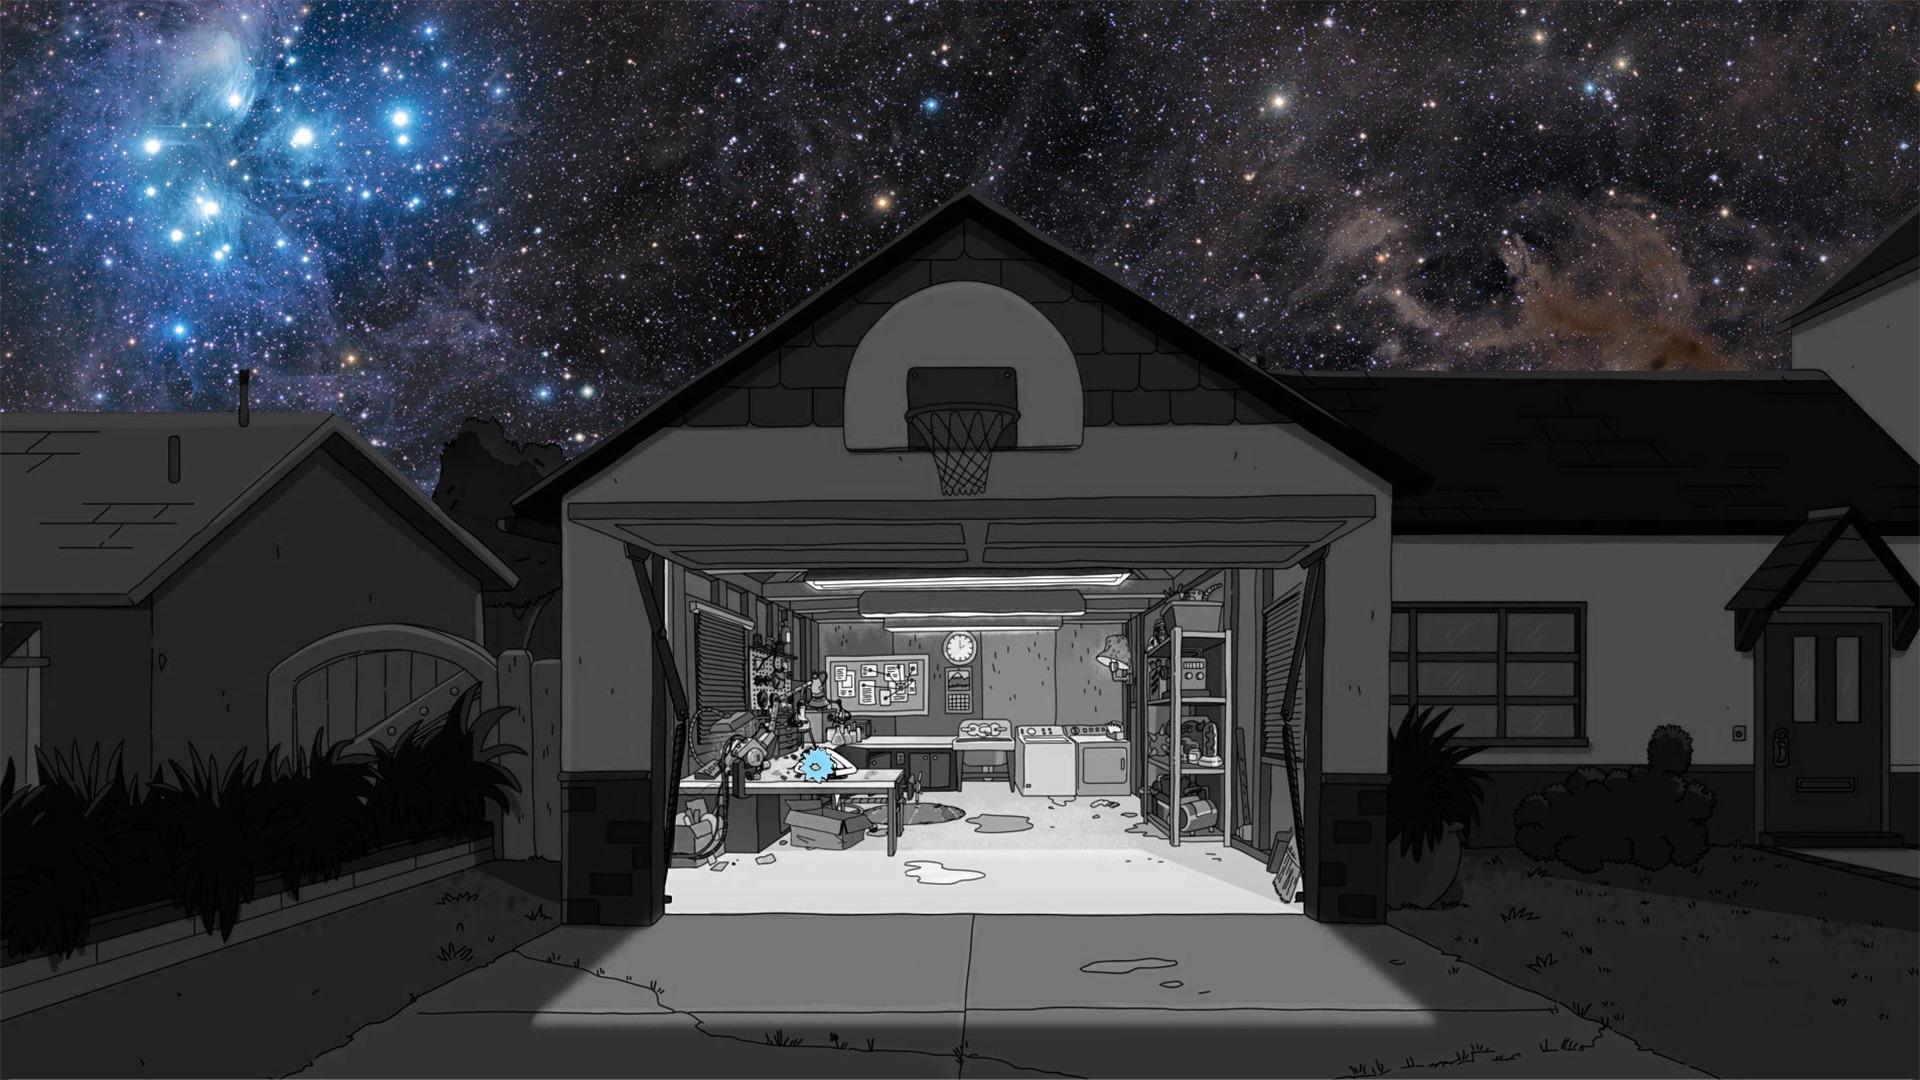 A garage with a basketball hoop, a telescope, and a table full of clutter. - Rick and Morty